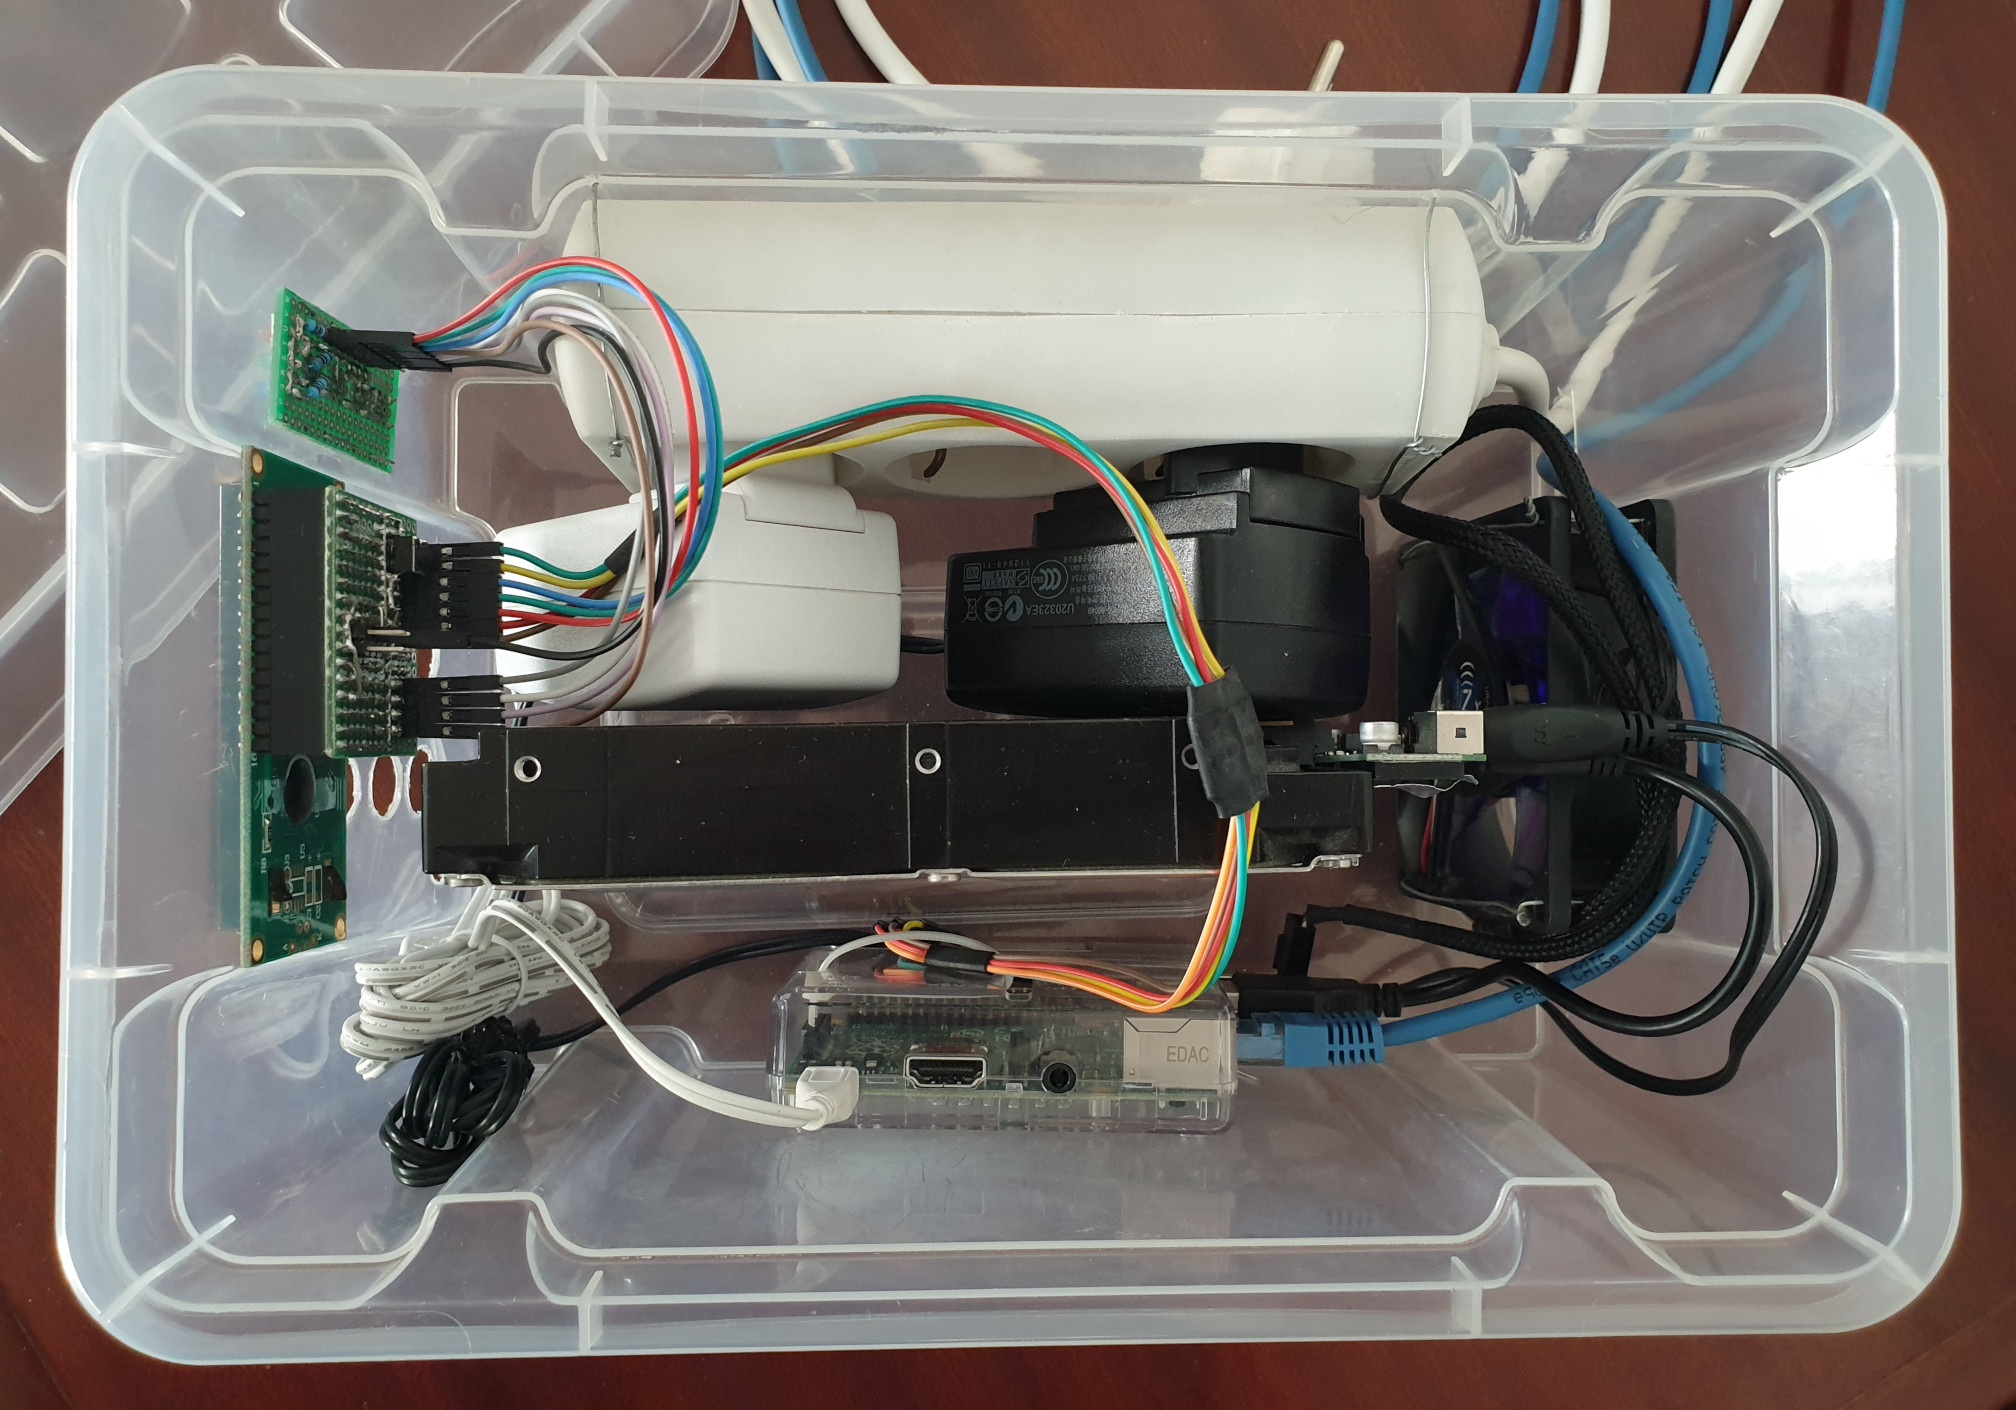 Overview of the classic Raspberry Pi in a plastic box